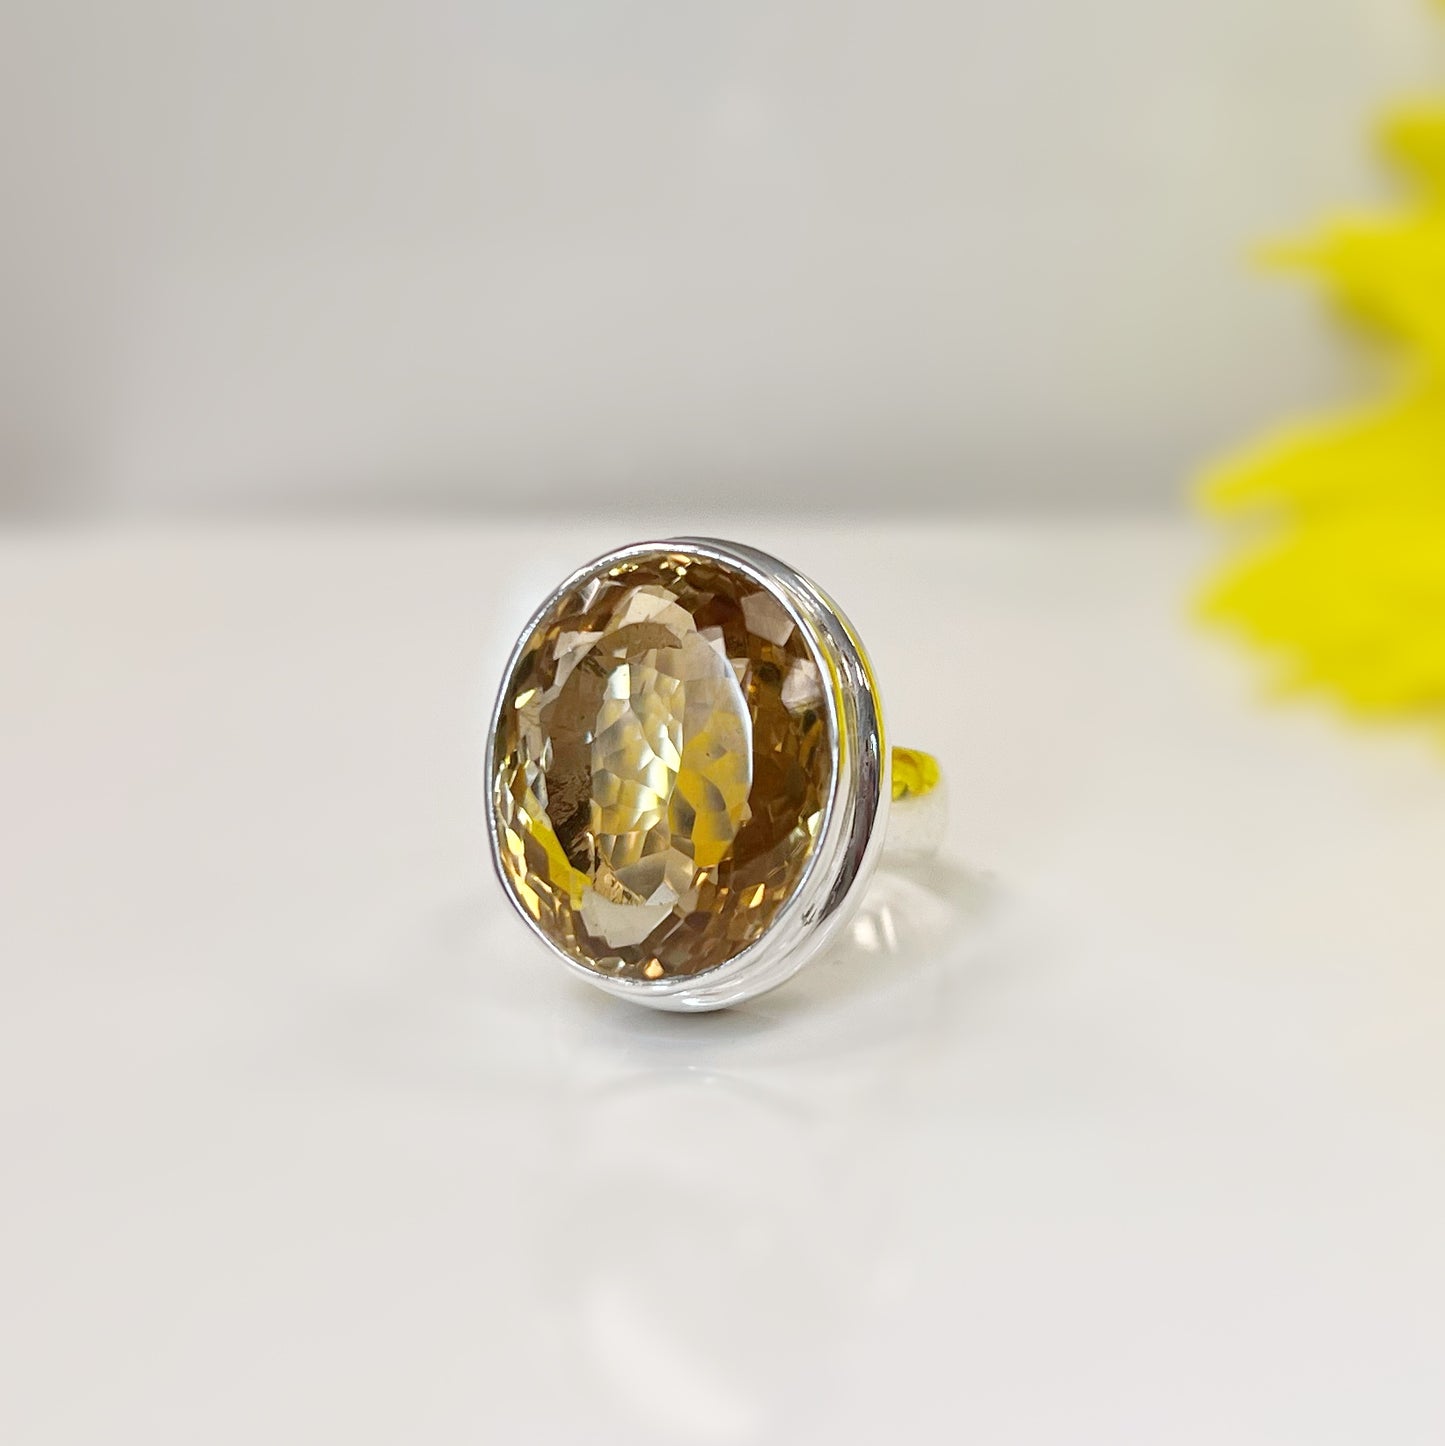 Chunky Sterling Silver Citrine Ring - Size adjustable